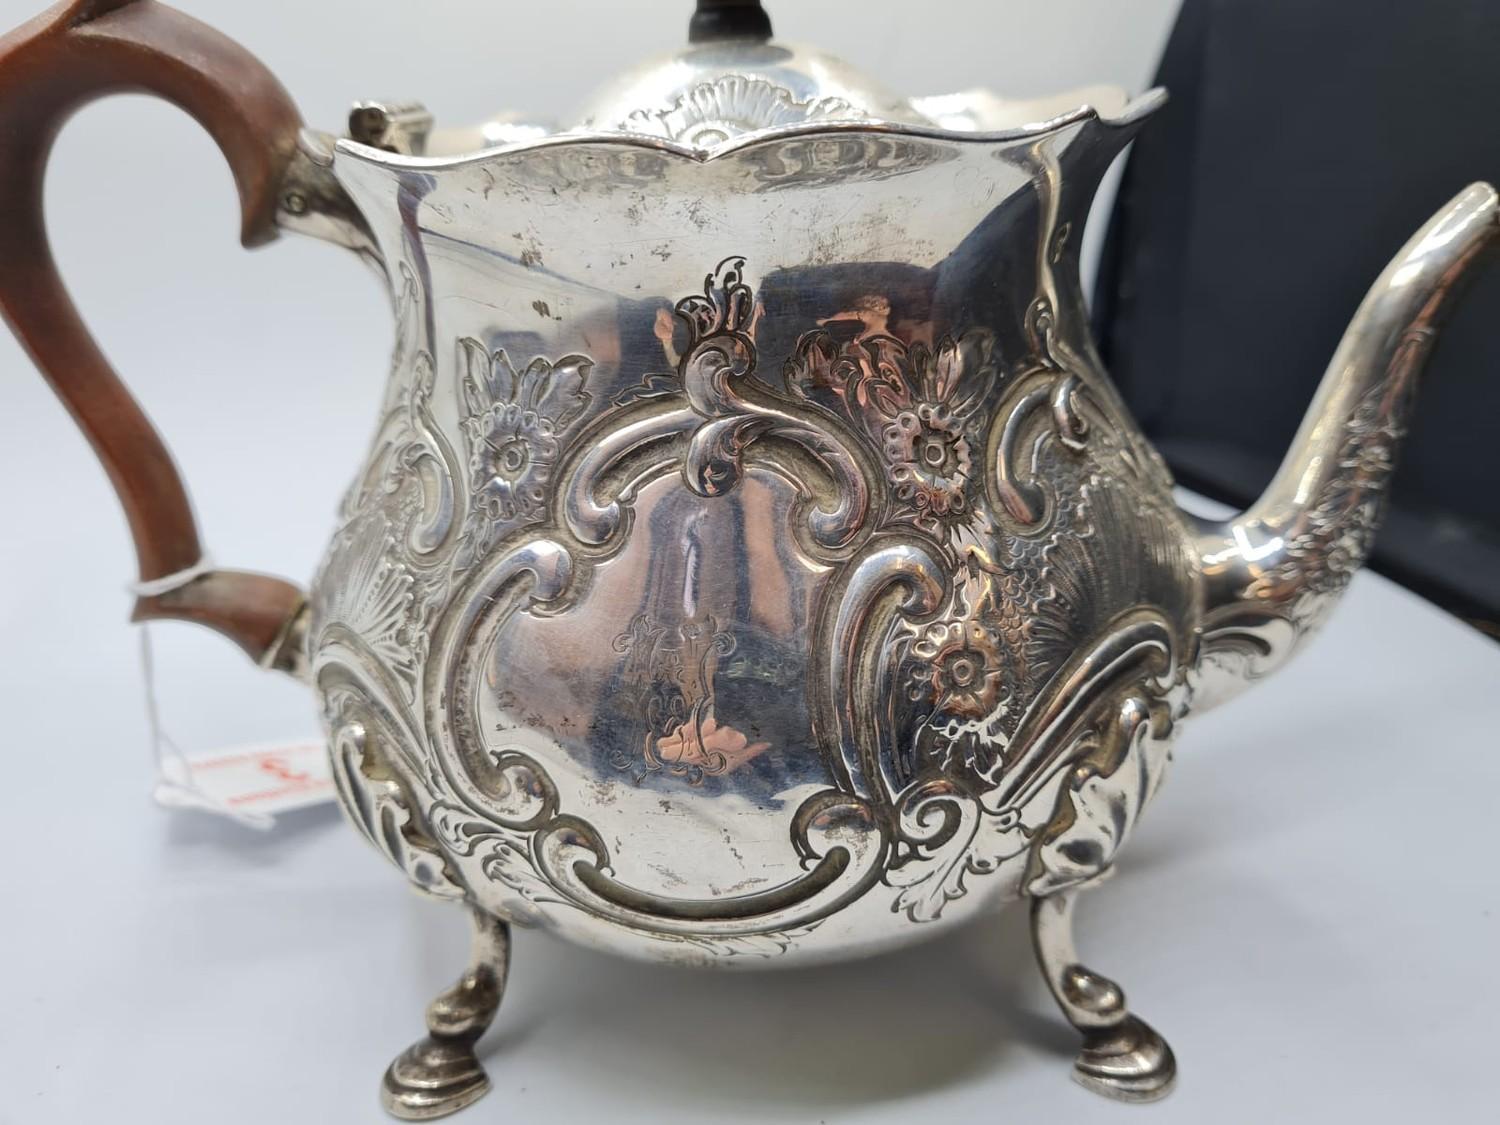 1920 Ornate Silver Teapot 766g - Image 5 of 8